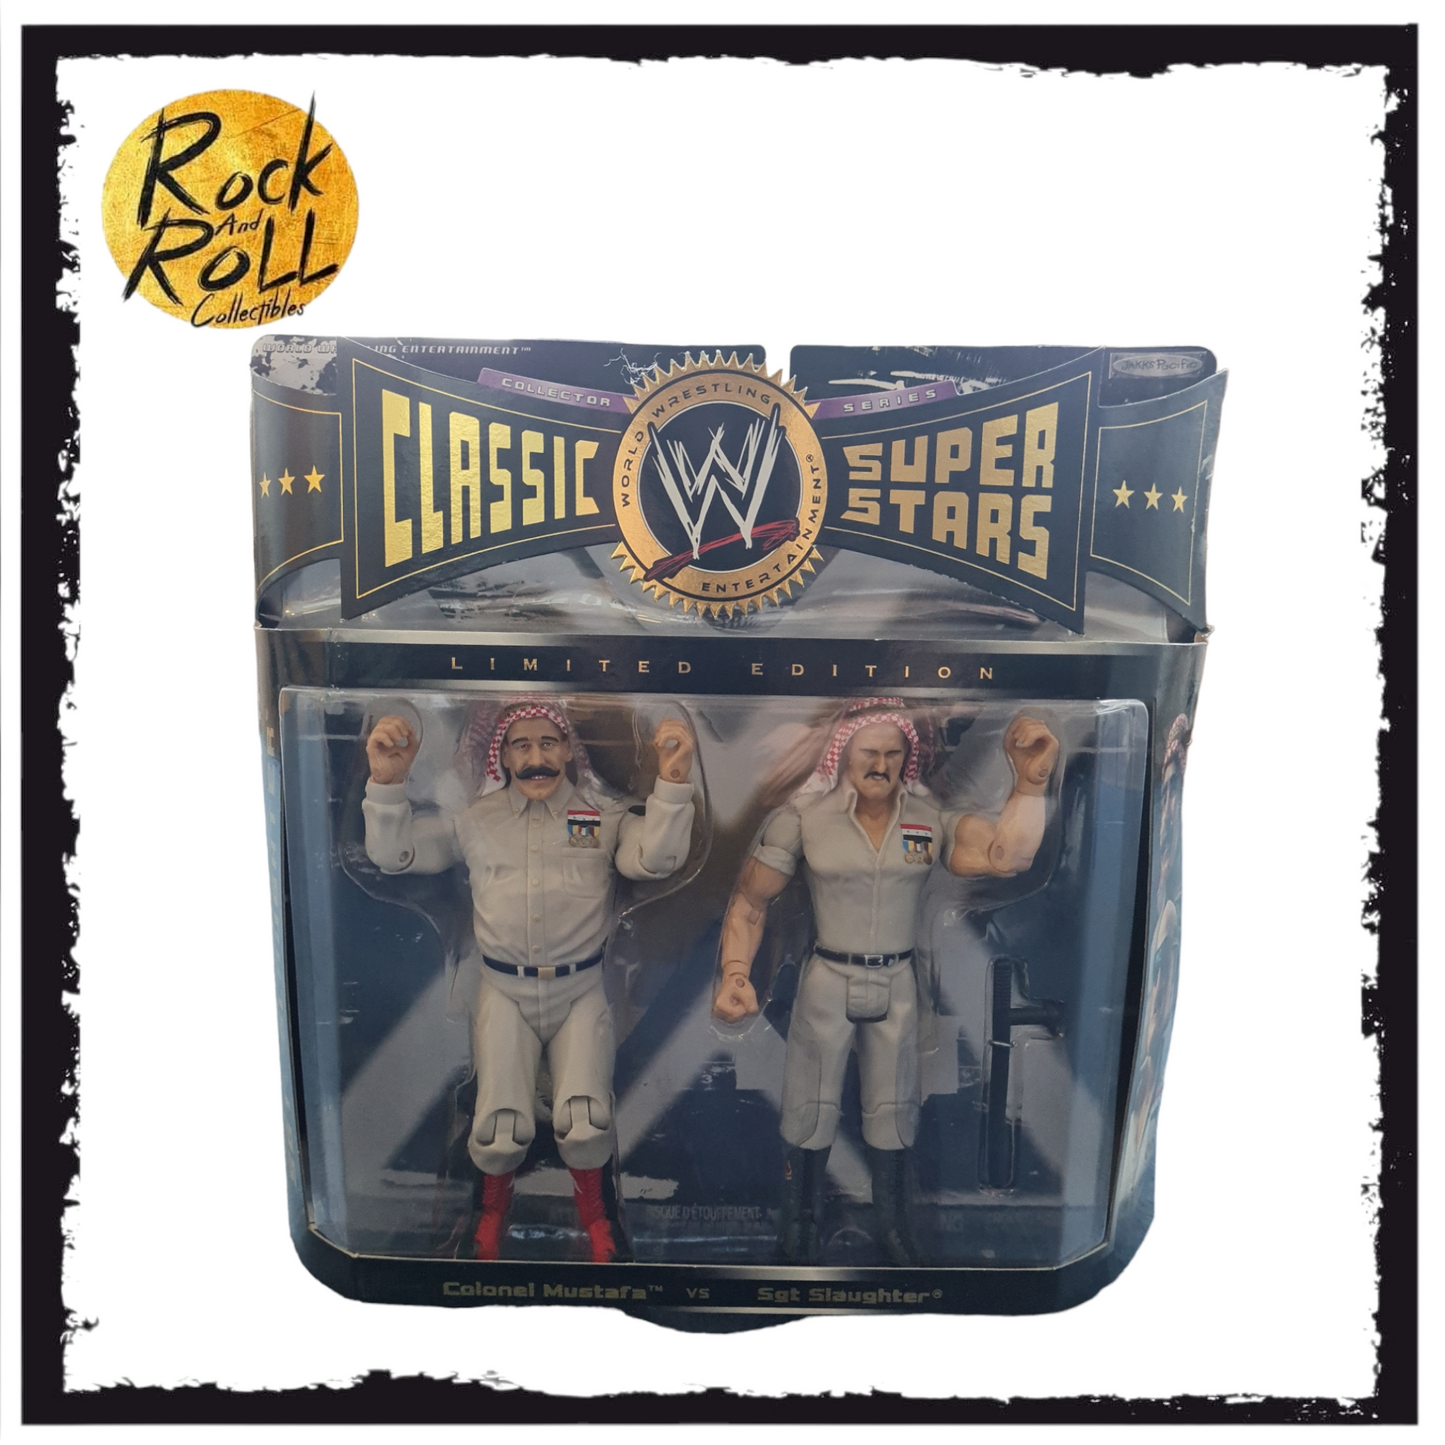 WWE Classic Superstars Collector Series Limited Edition - Colonel Mustafa vs Sgt. Slaughter